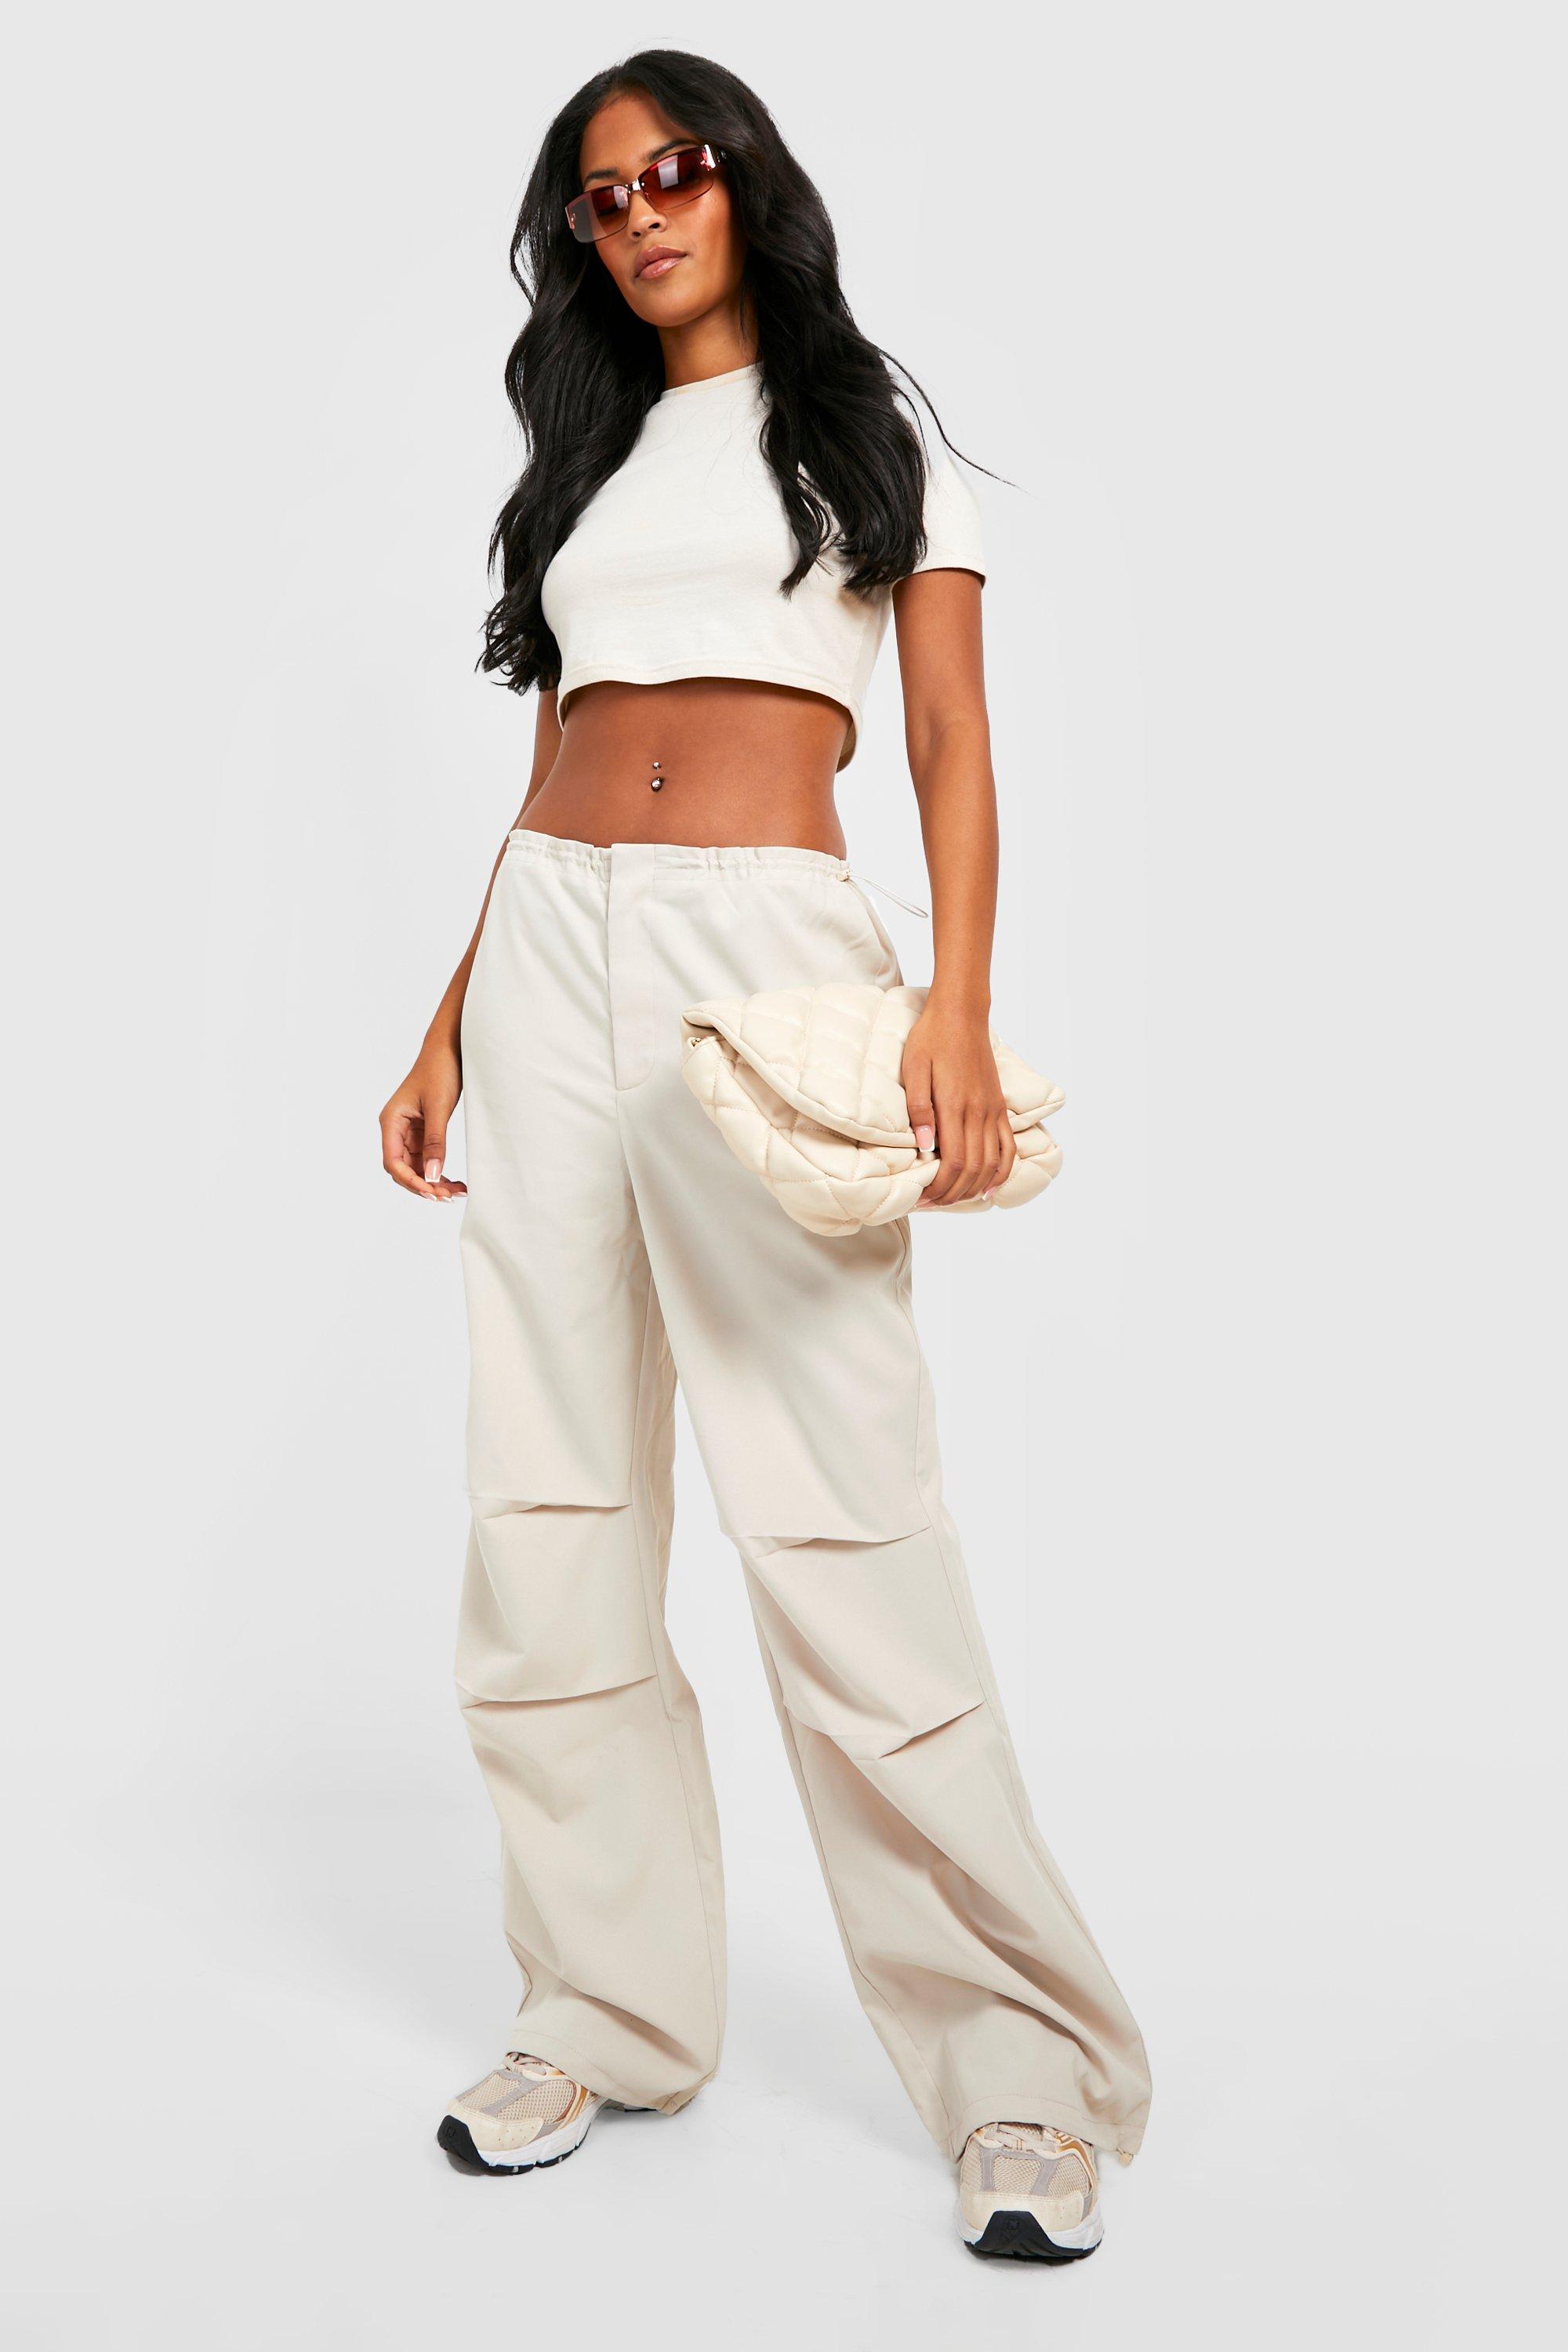 Free People Parachute Pants: My Honest Opinion - Ayana Lage